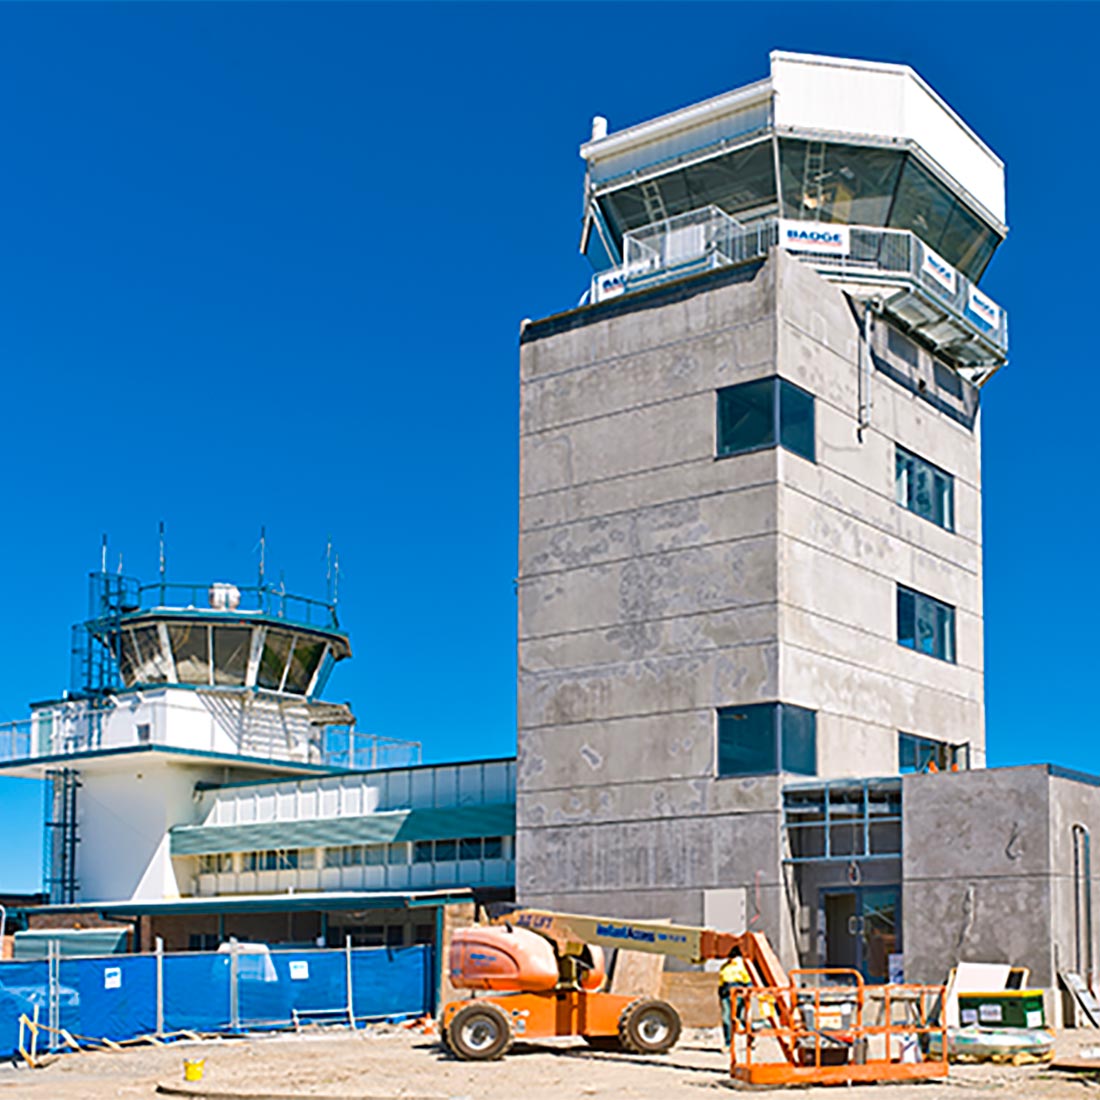 Air control tower during construction